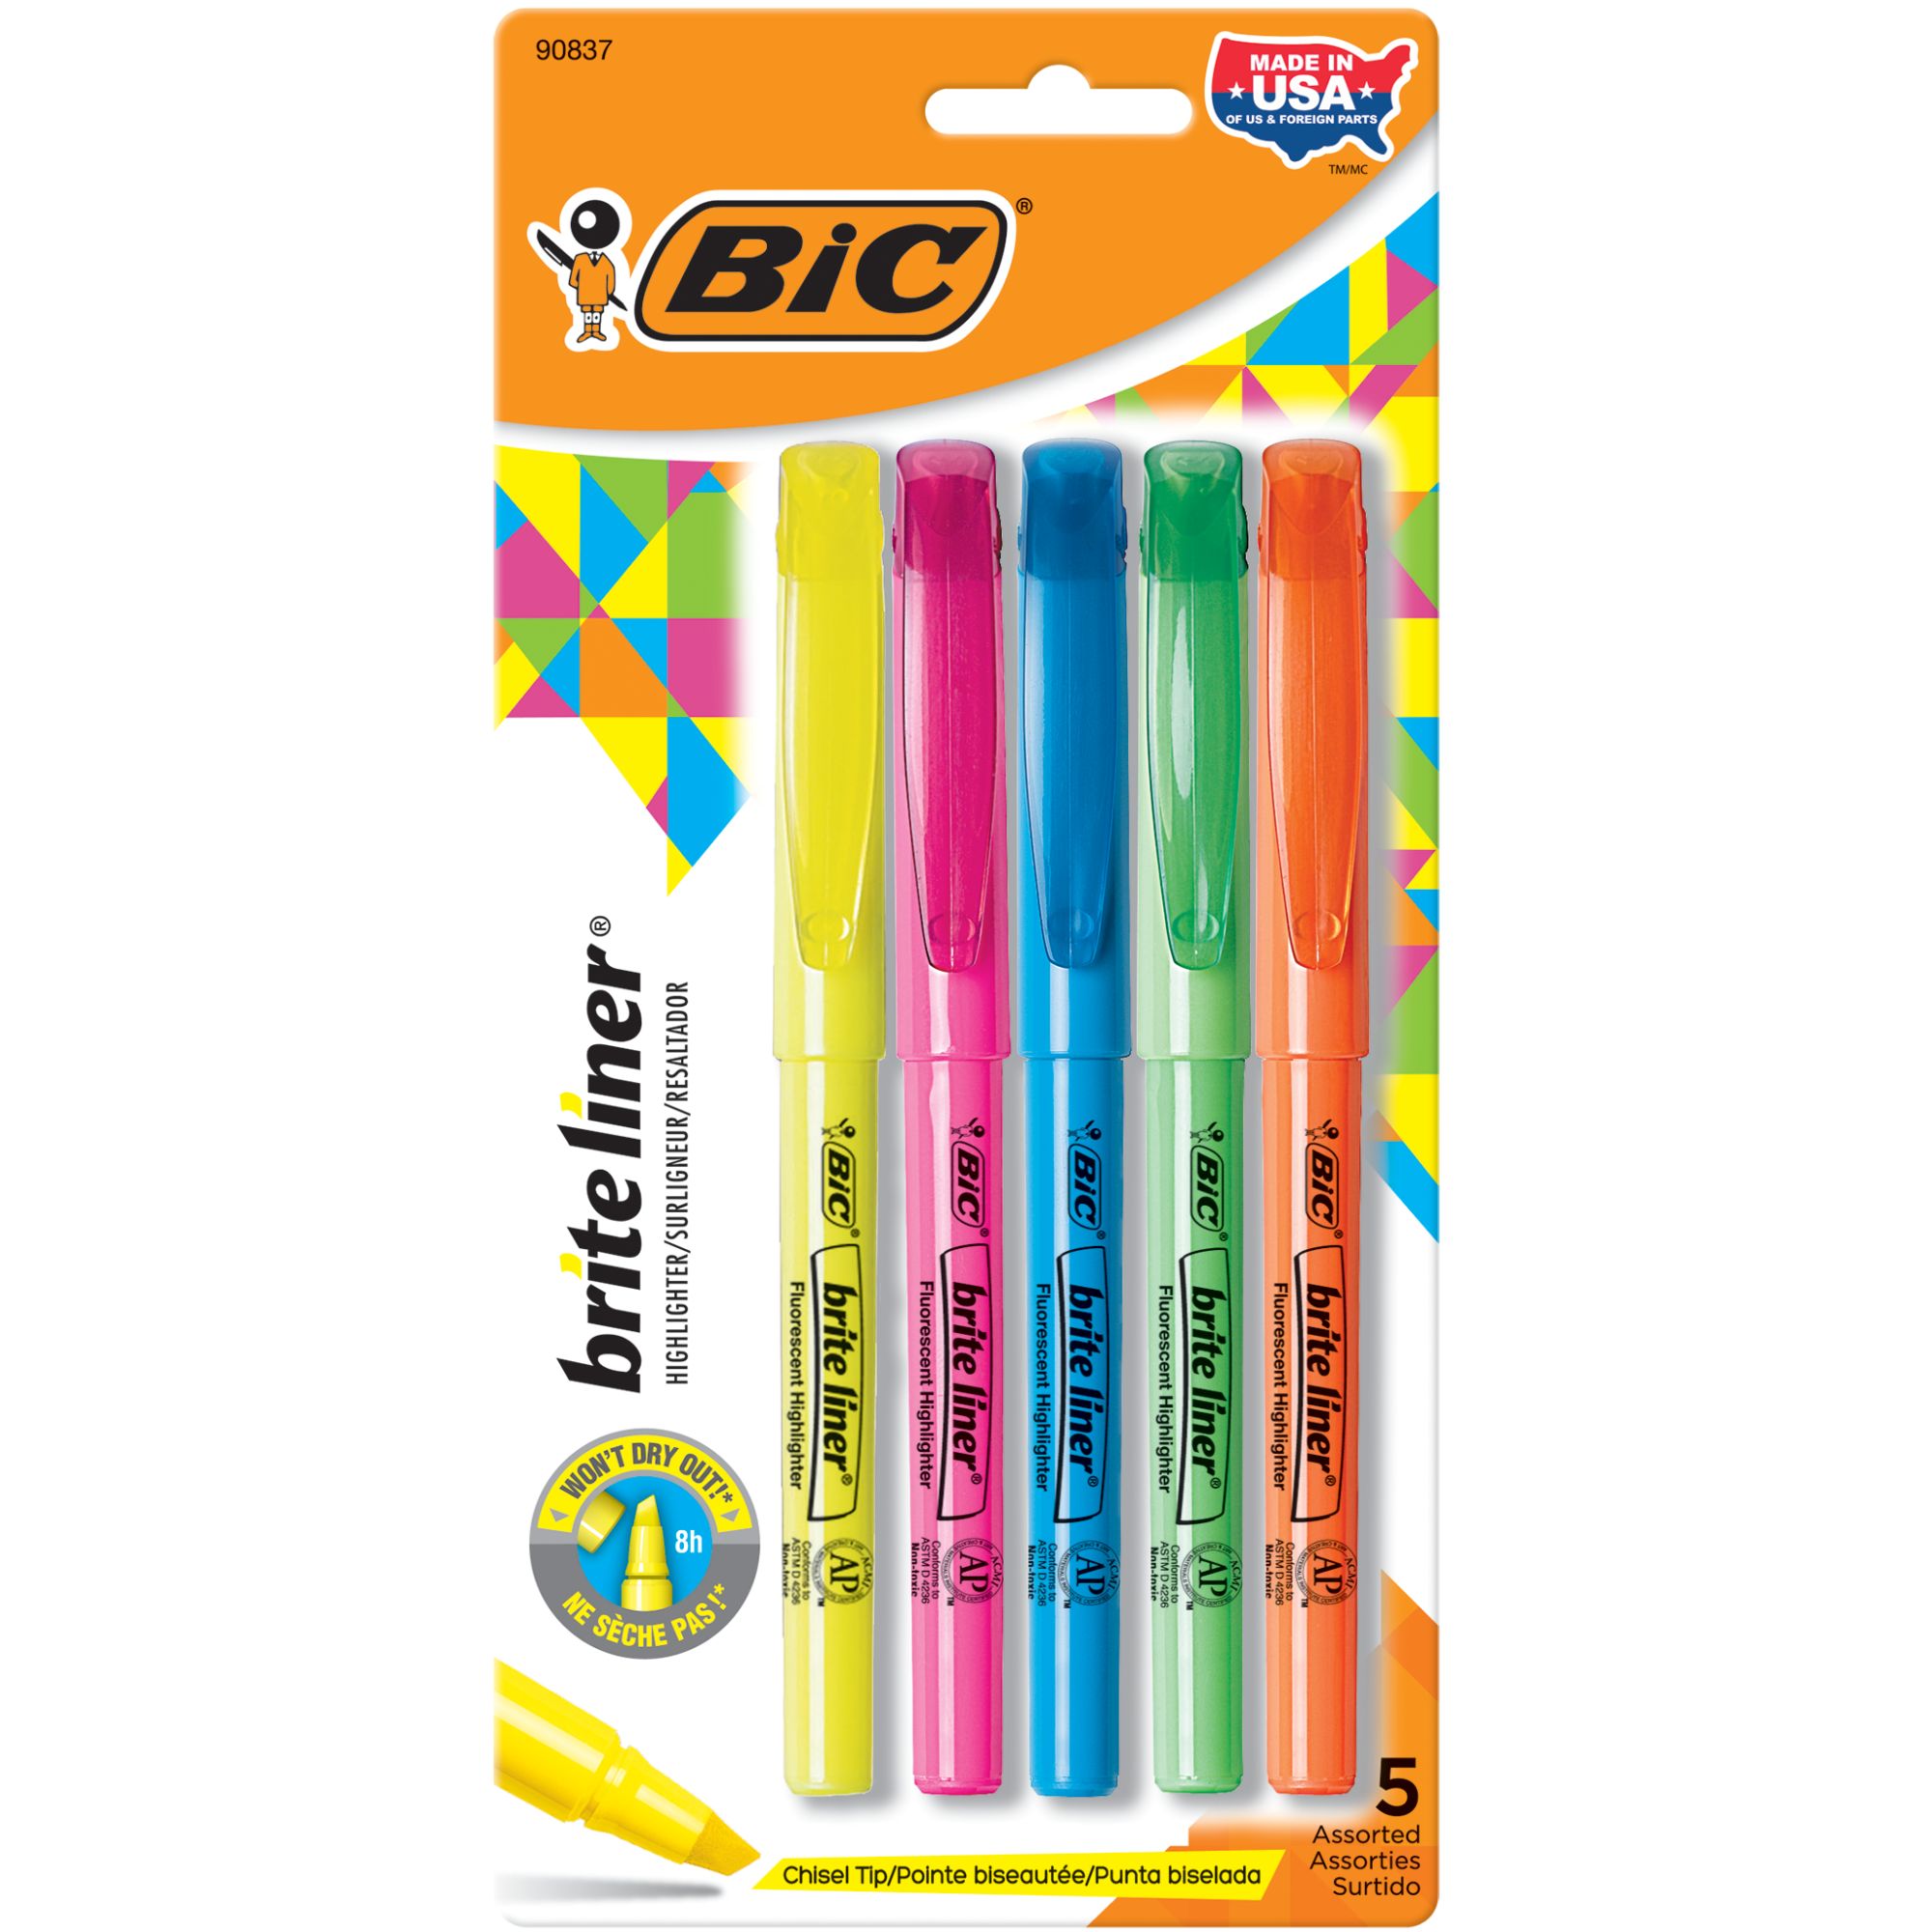 BIC Brite Liner Highlighters, Chisel Tip, Assorted Colors, 5 Count - image 1 of 12